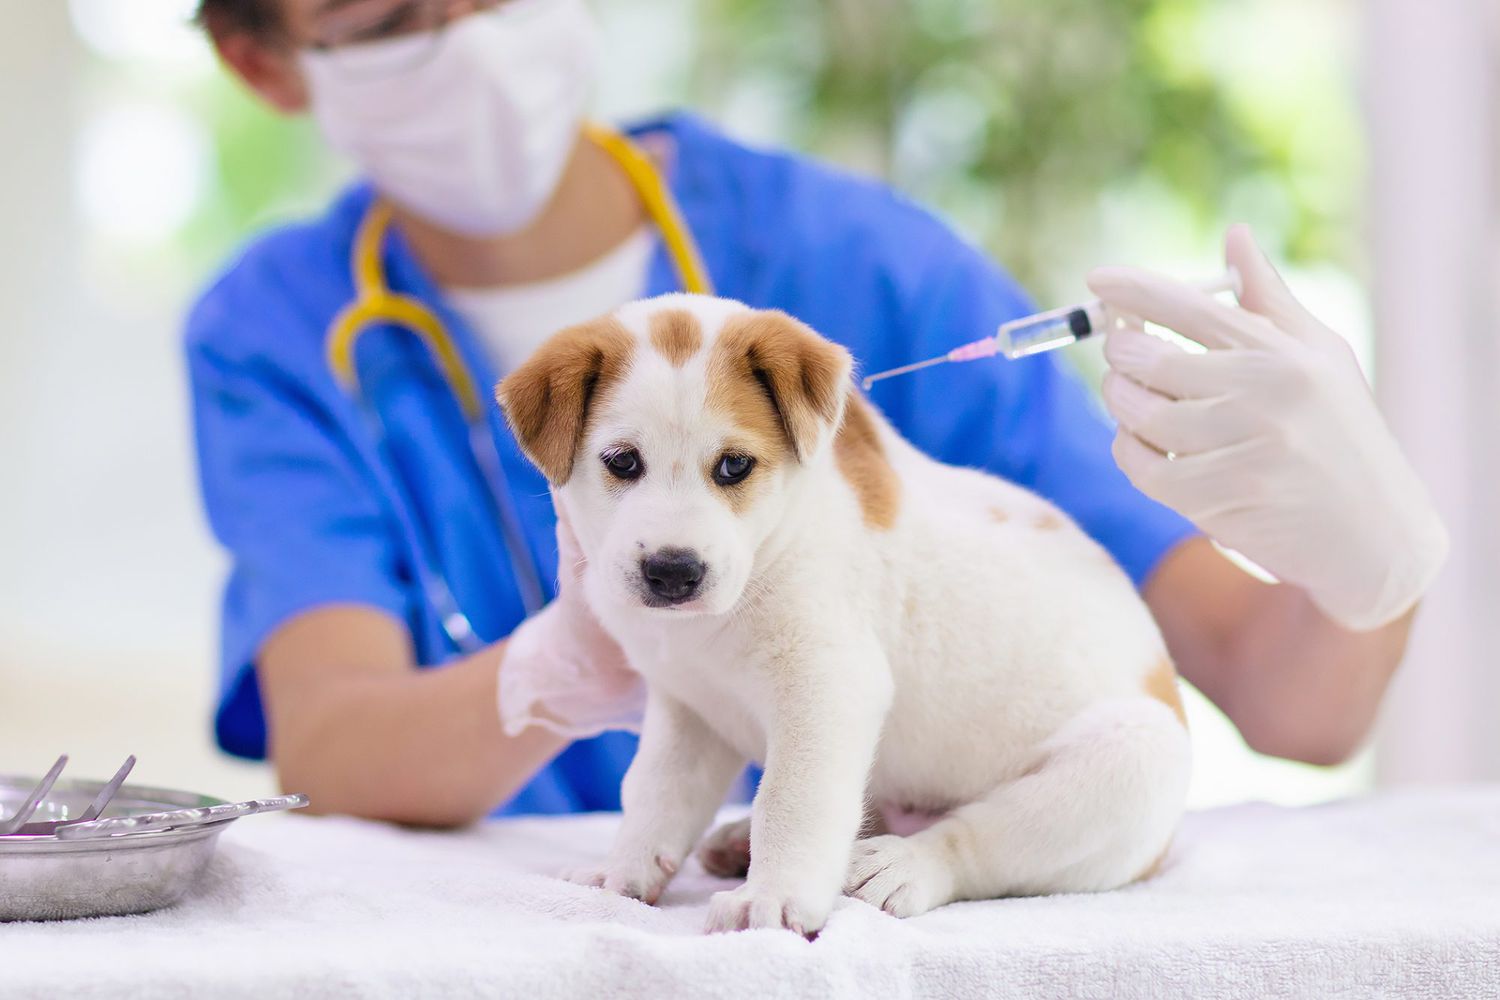 image?url=https%3A%2F%2Fstatic.onecms.io%2Fwp content%2Fuploads%2Fsites%2F47%2F2021%2F09%2F14%2Frabies vaccine for dogs 1276909247 2000